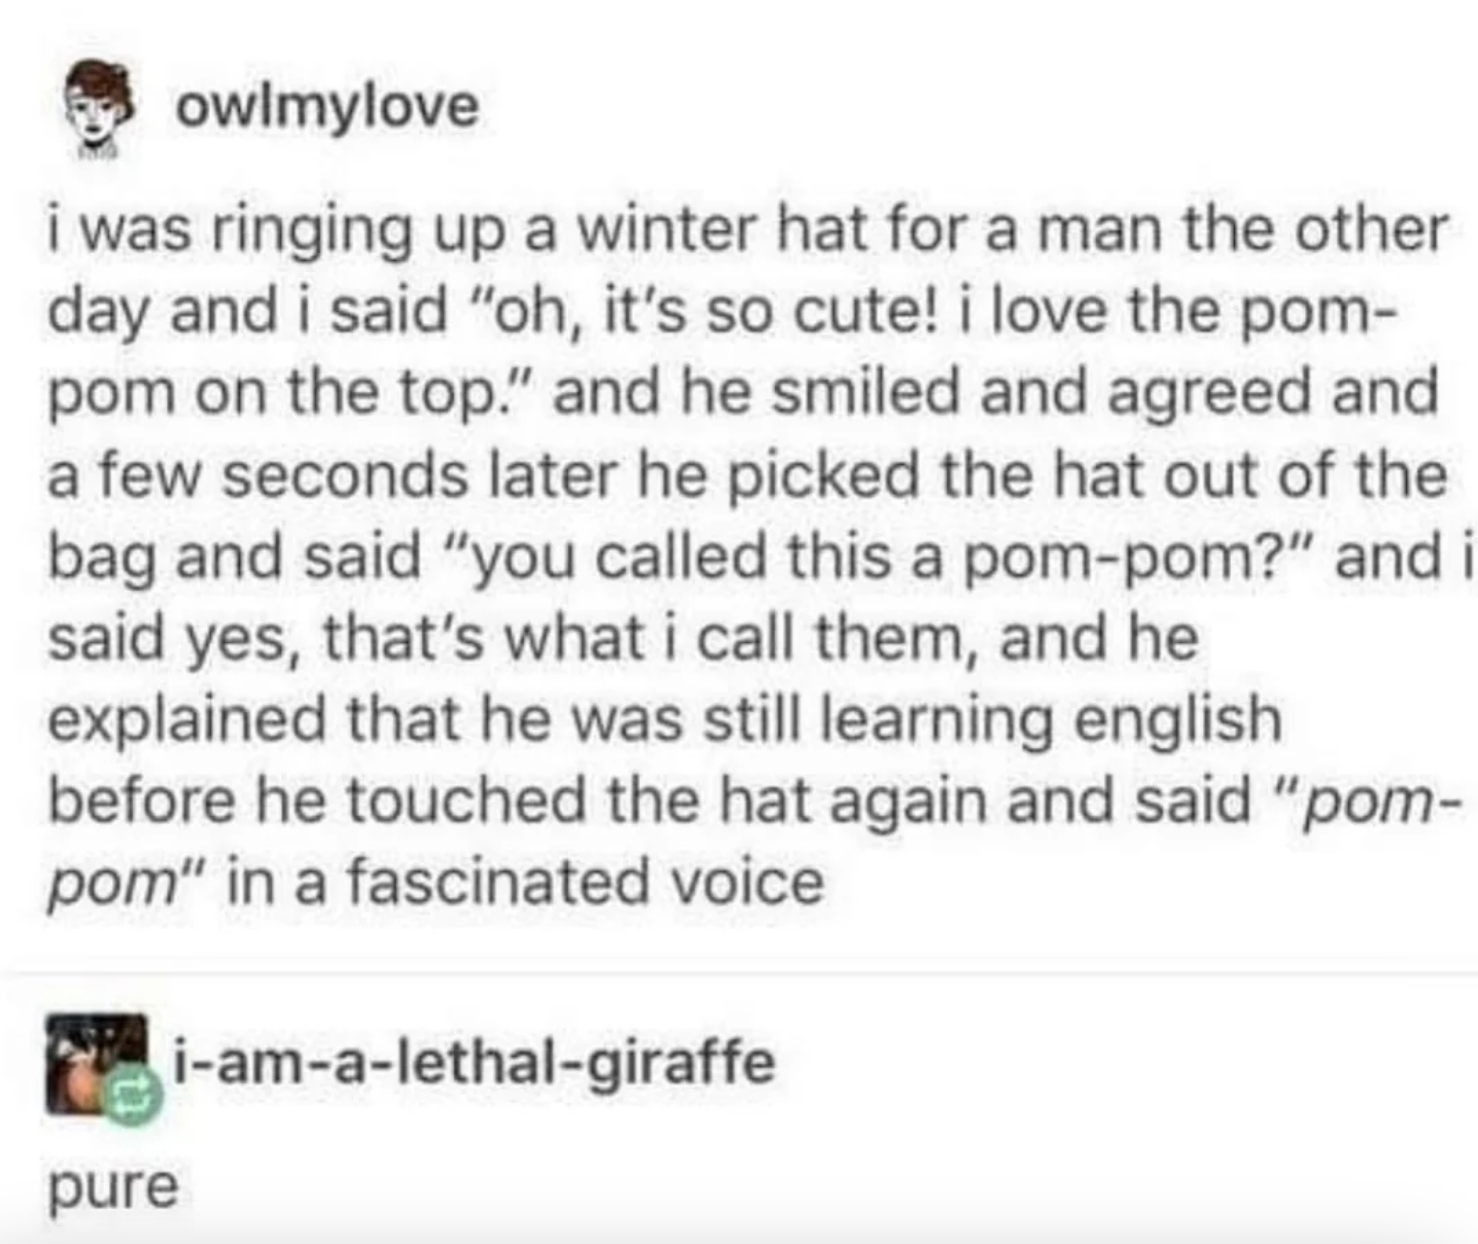 Cashier rings up a winter hat for a man, says they love the pom-pom on top, and the guy smiles, then comes back a few seconds later, says &quot;You called this a pom-pom?&quot; and said he was still learning English, then touched the hat and said &quot;pom-pom&quot; slowly